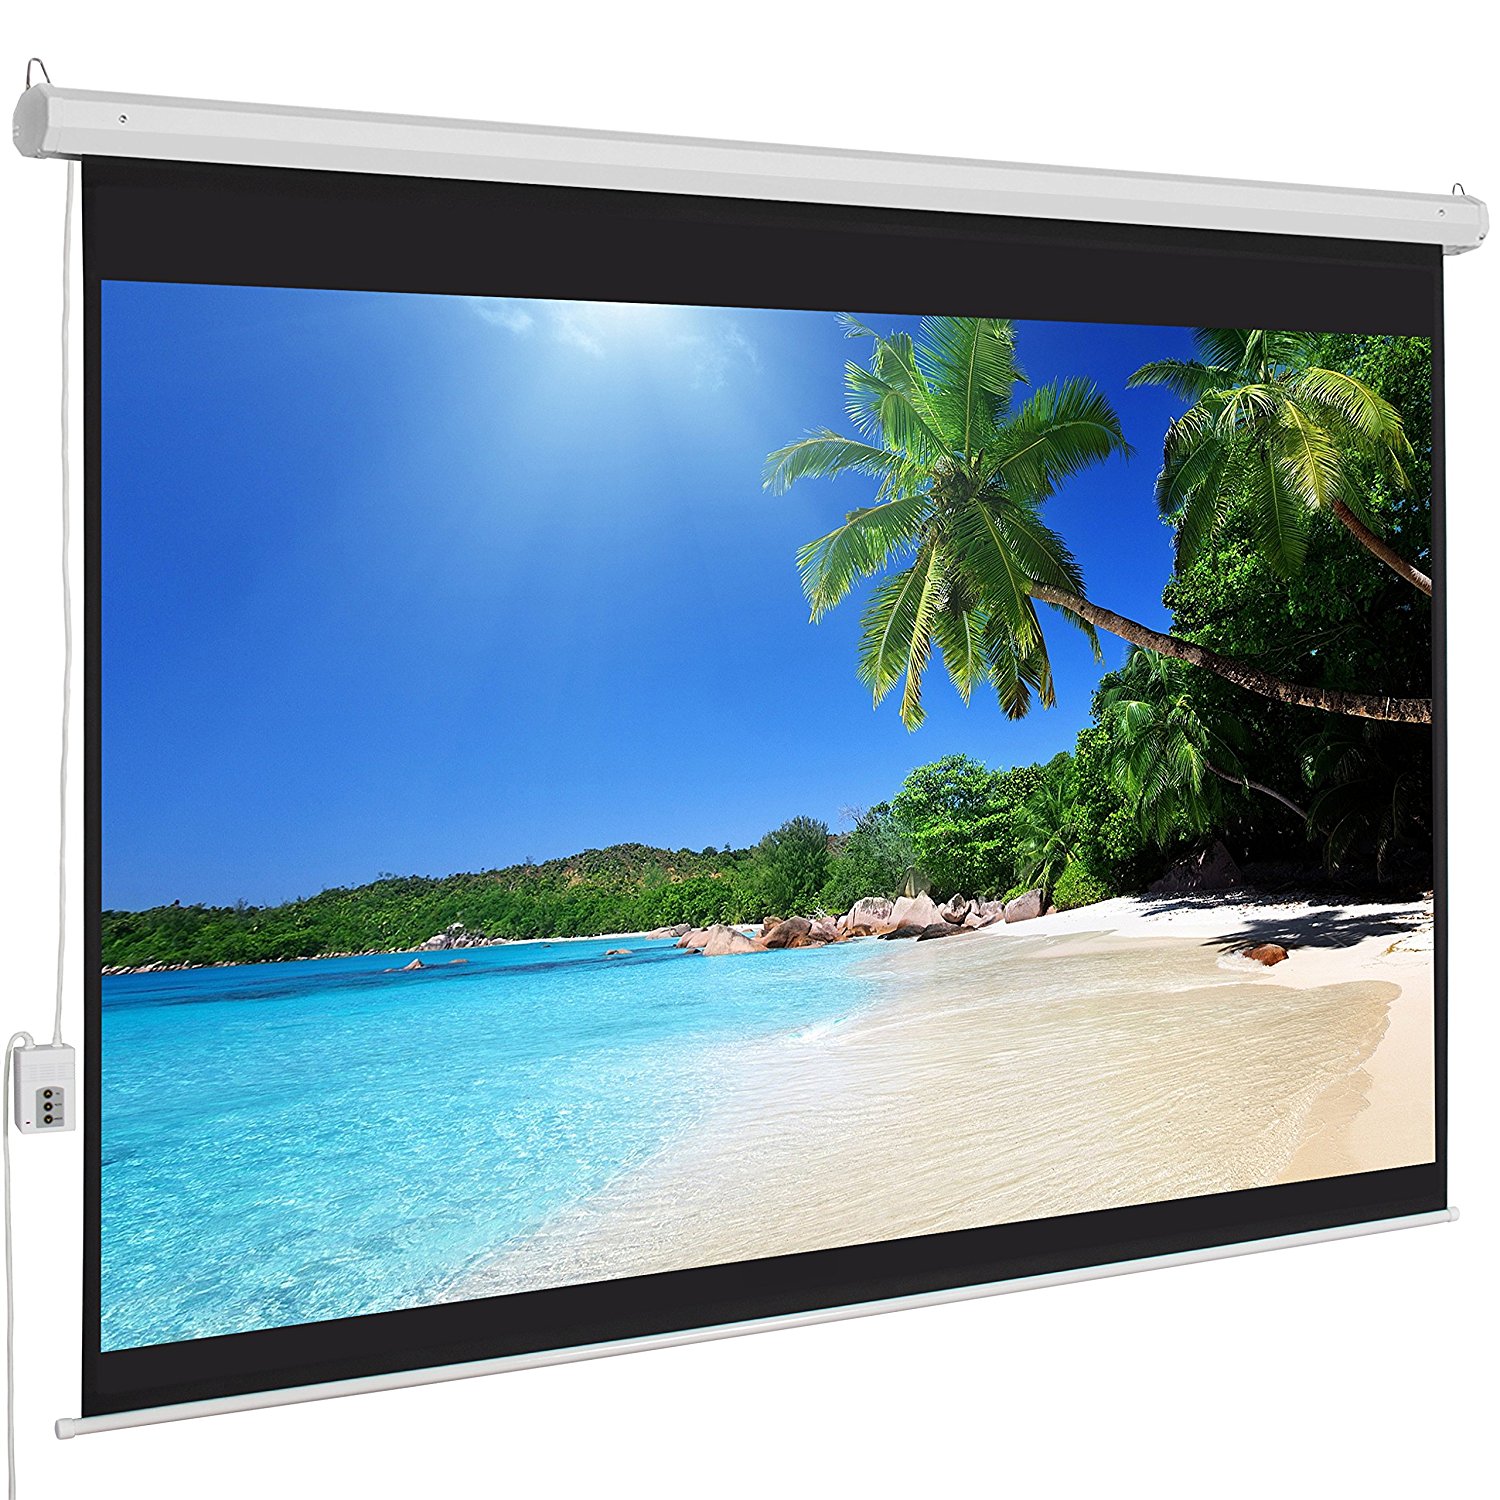 Best Choice Products Motorized Electric Auto HD Projection Screen, 100-Inch, 4:3 Display